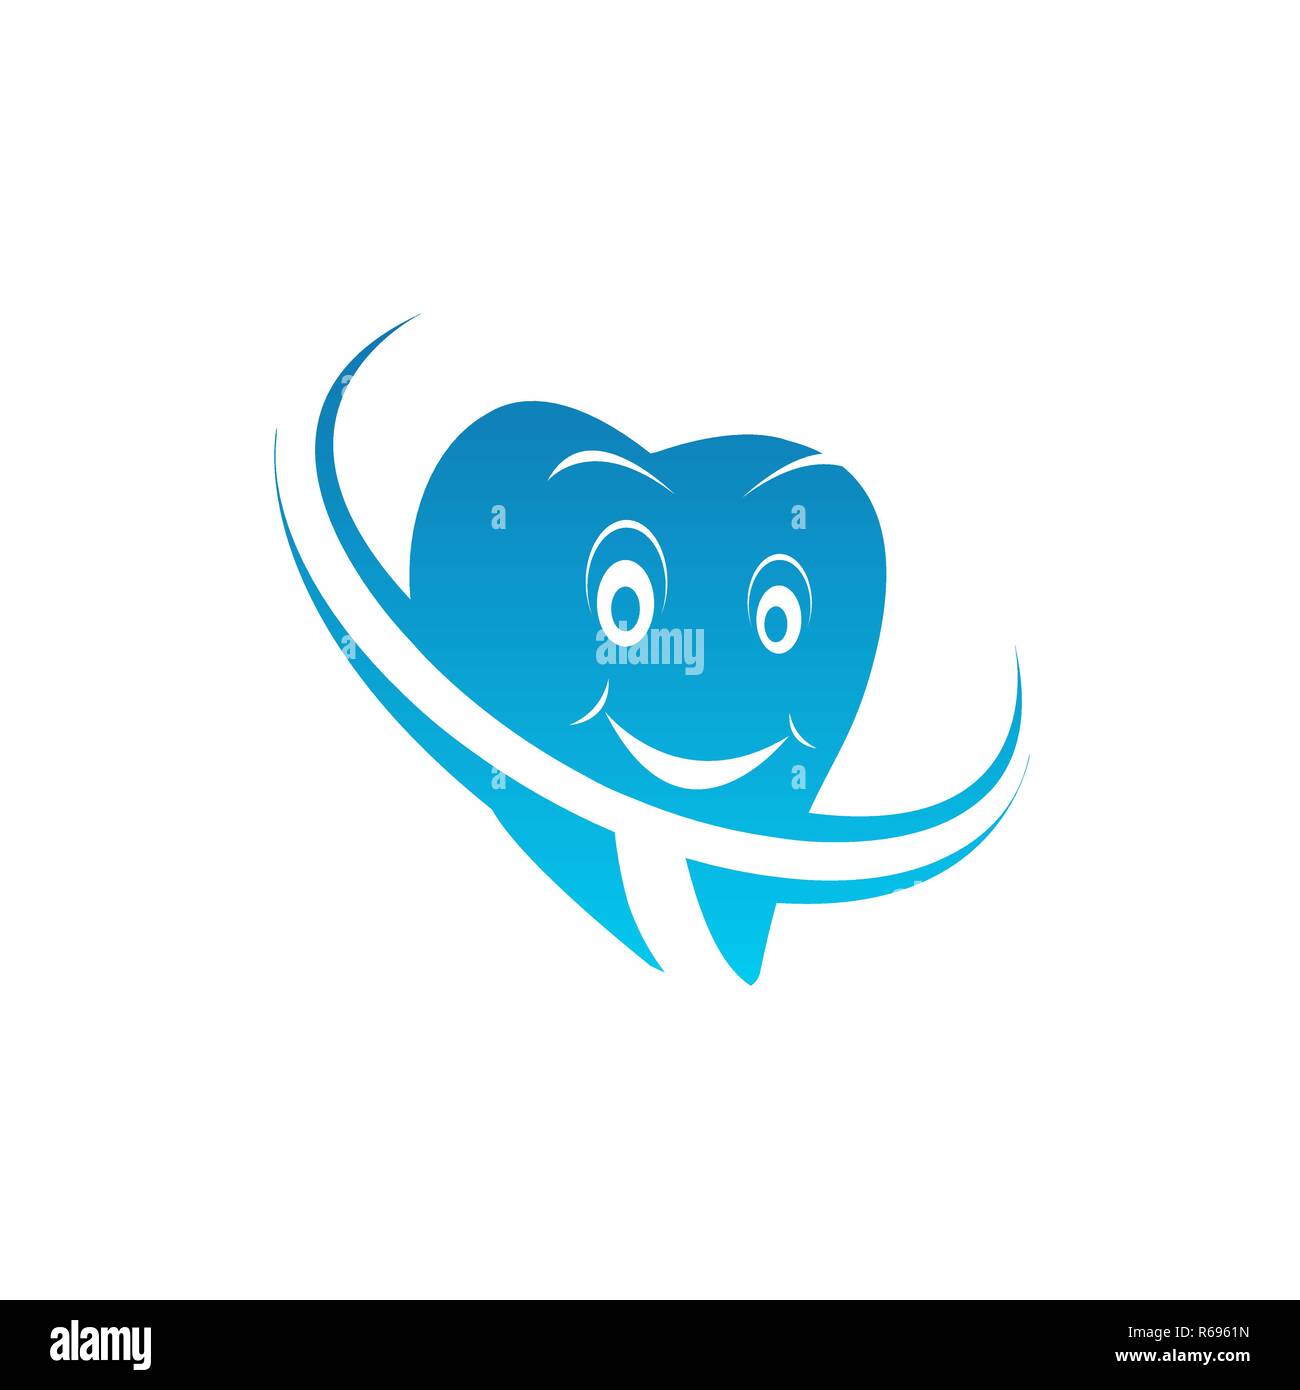 Dental family clinic vector logo template. Isolated icon of cartoon dentist tooth smile Stock Vector